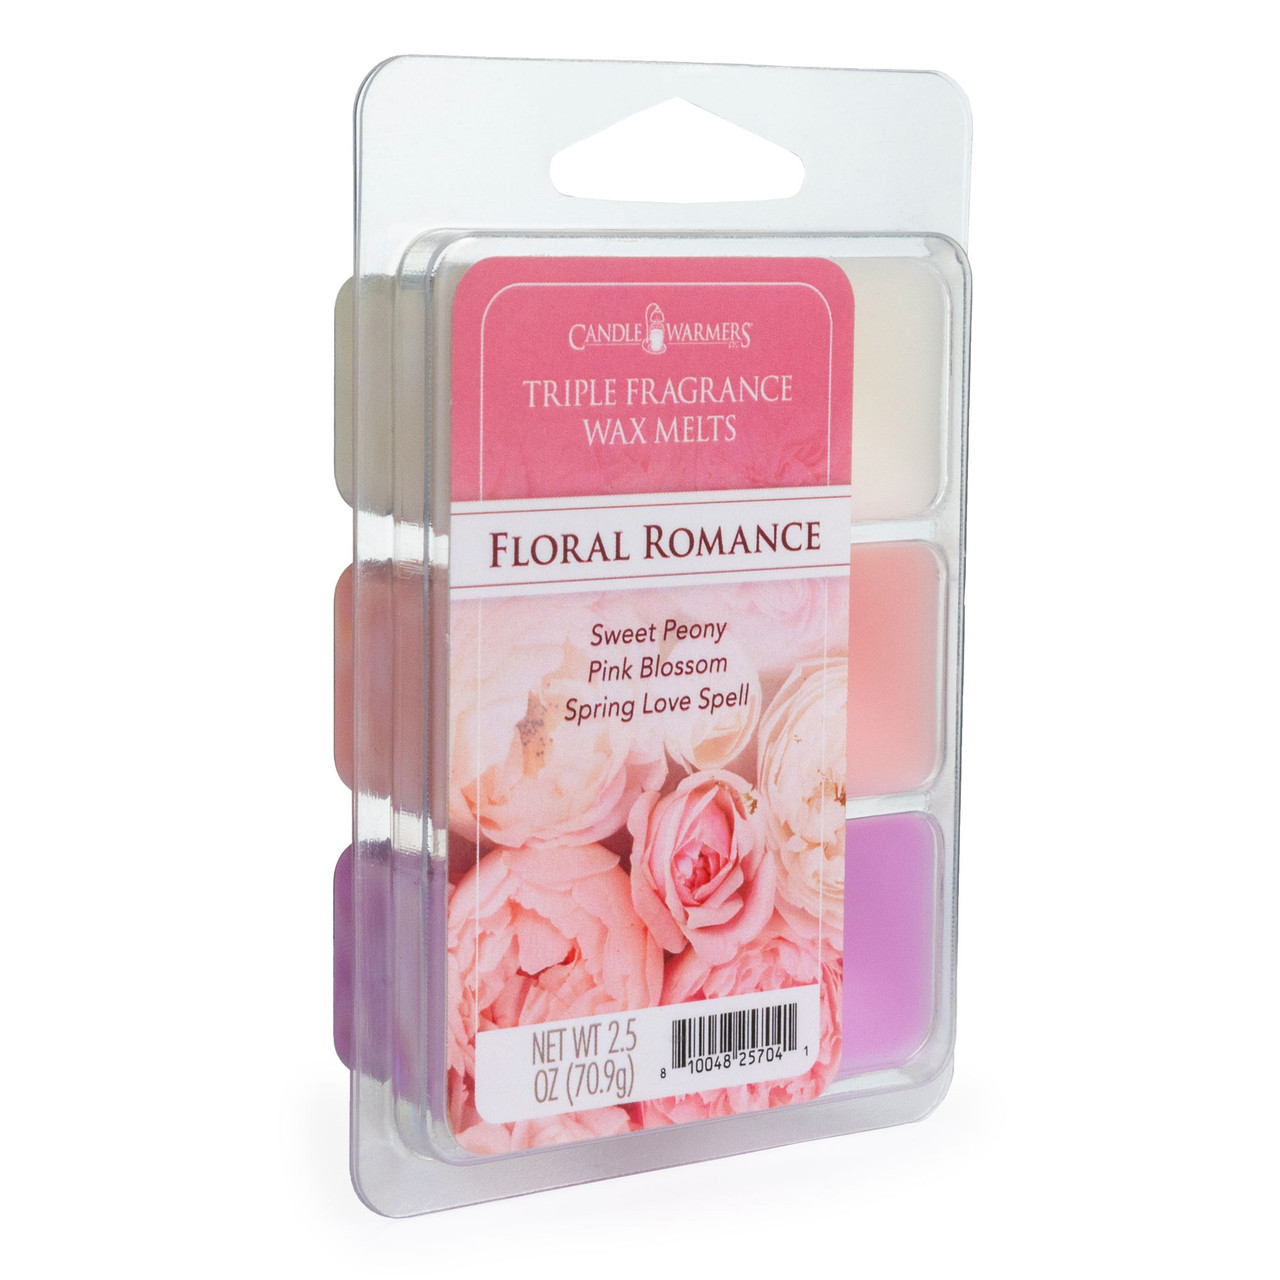 Rose Petals Classic Wax Melts by Candle Warmers 2.5 oz